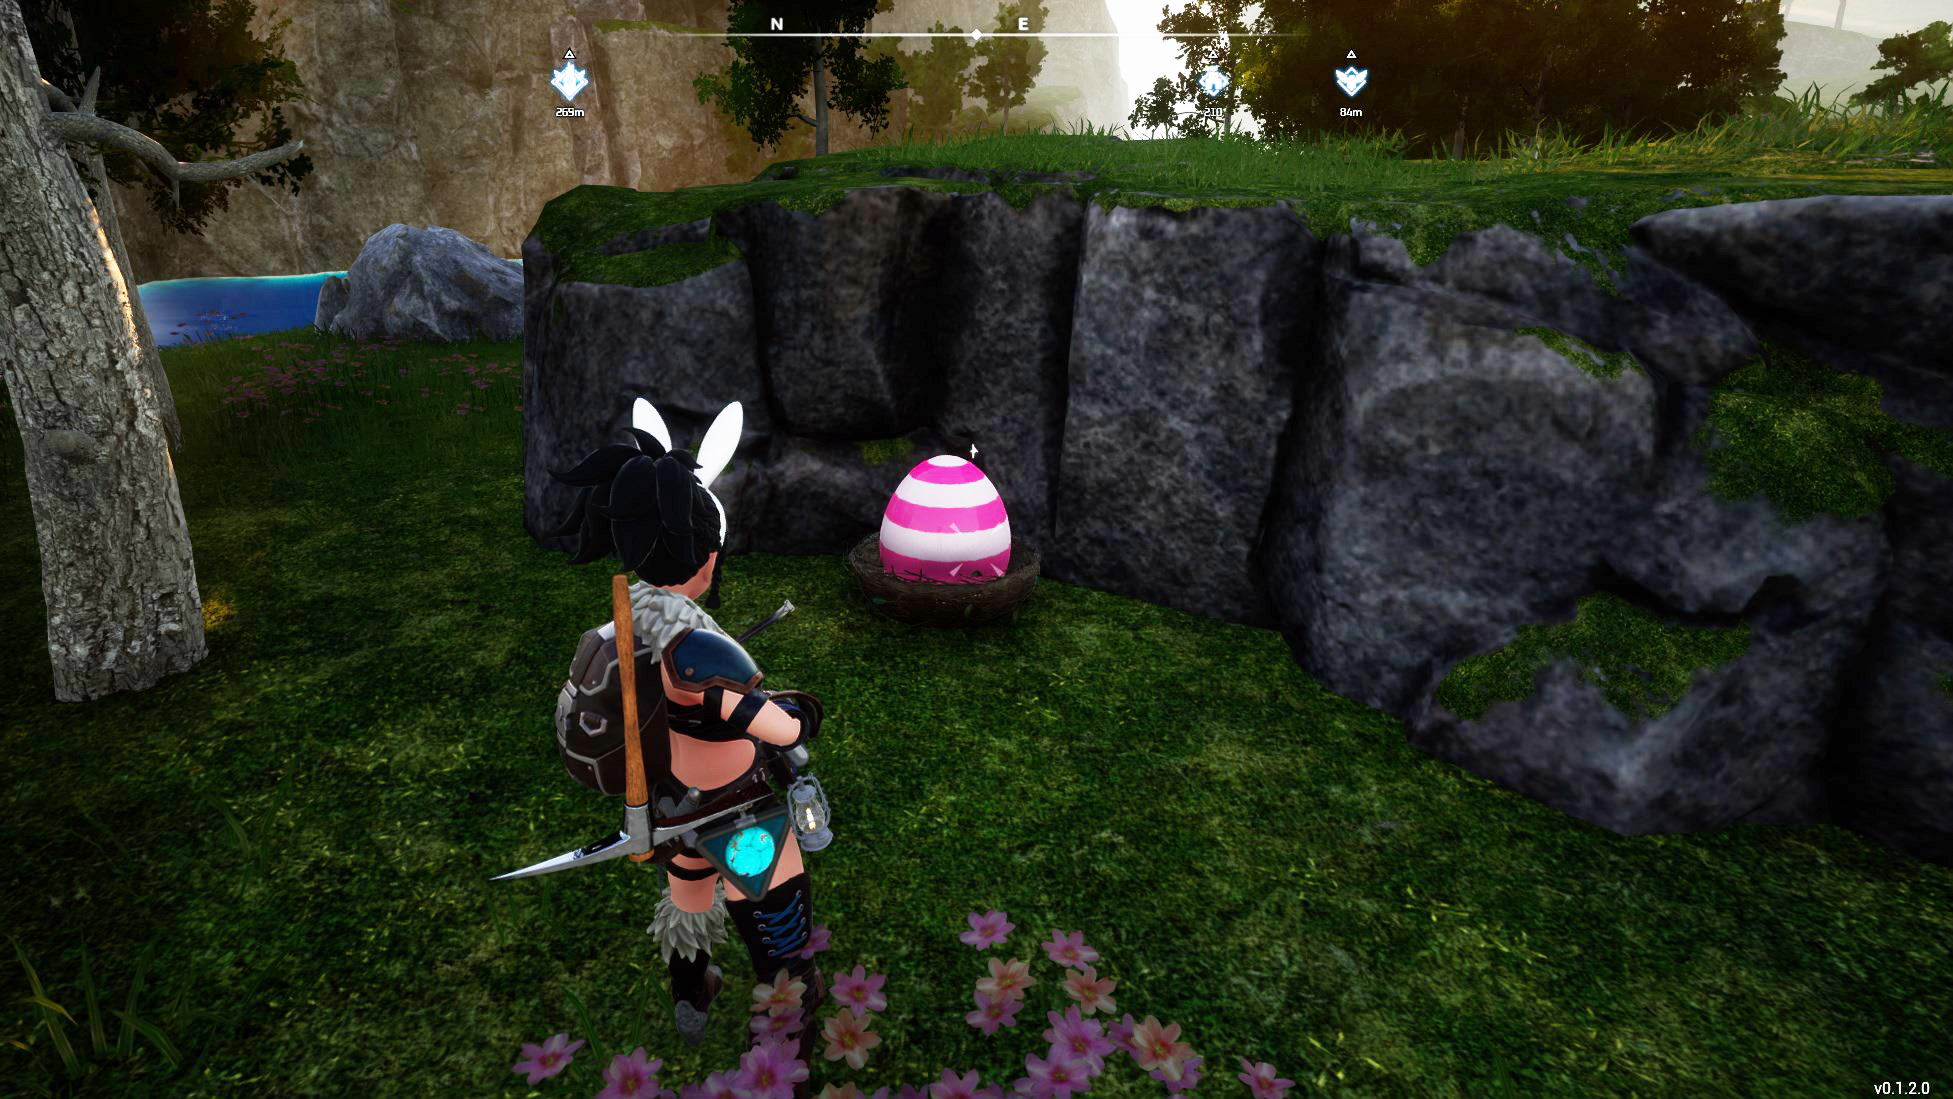 A Palworld player in front of a pink and white striped egg